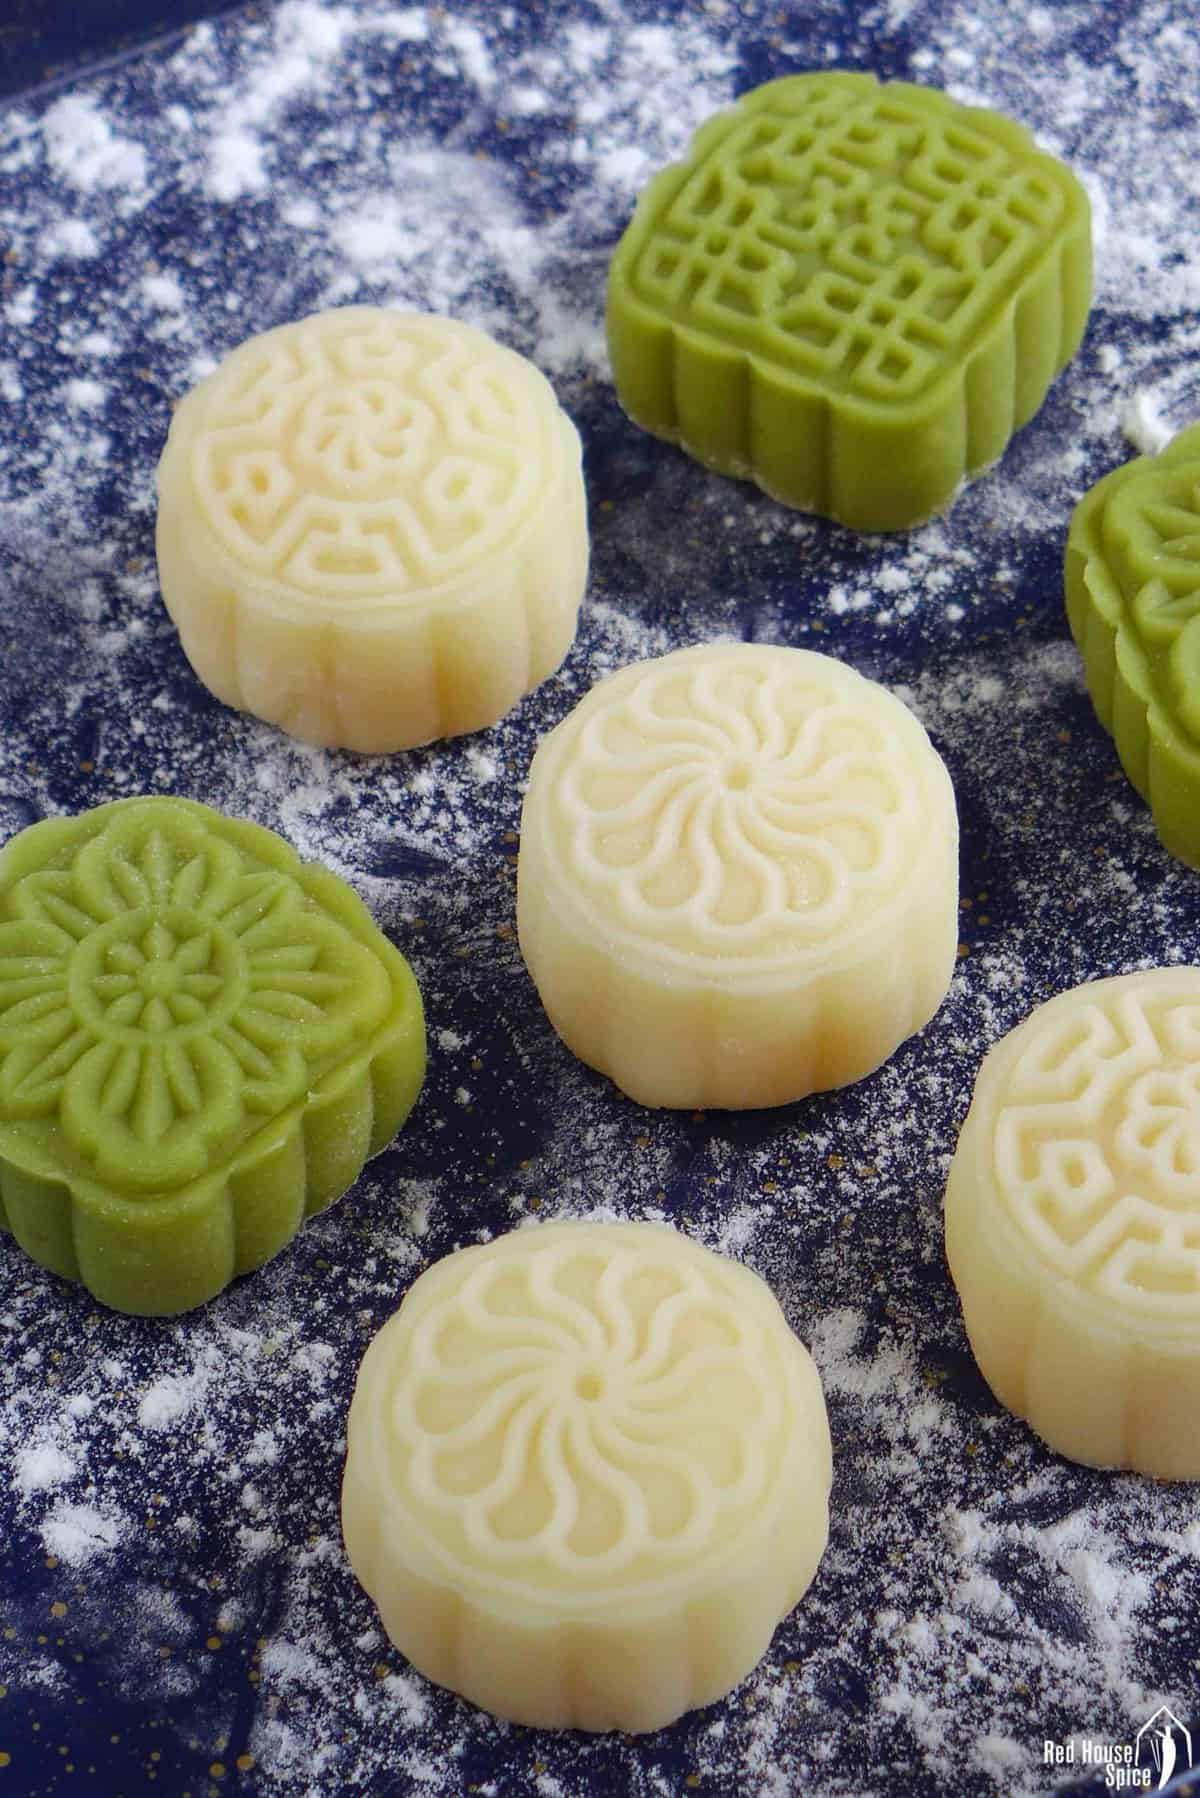 white and green Snow Skin Mooncakes on a dusted surface.